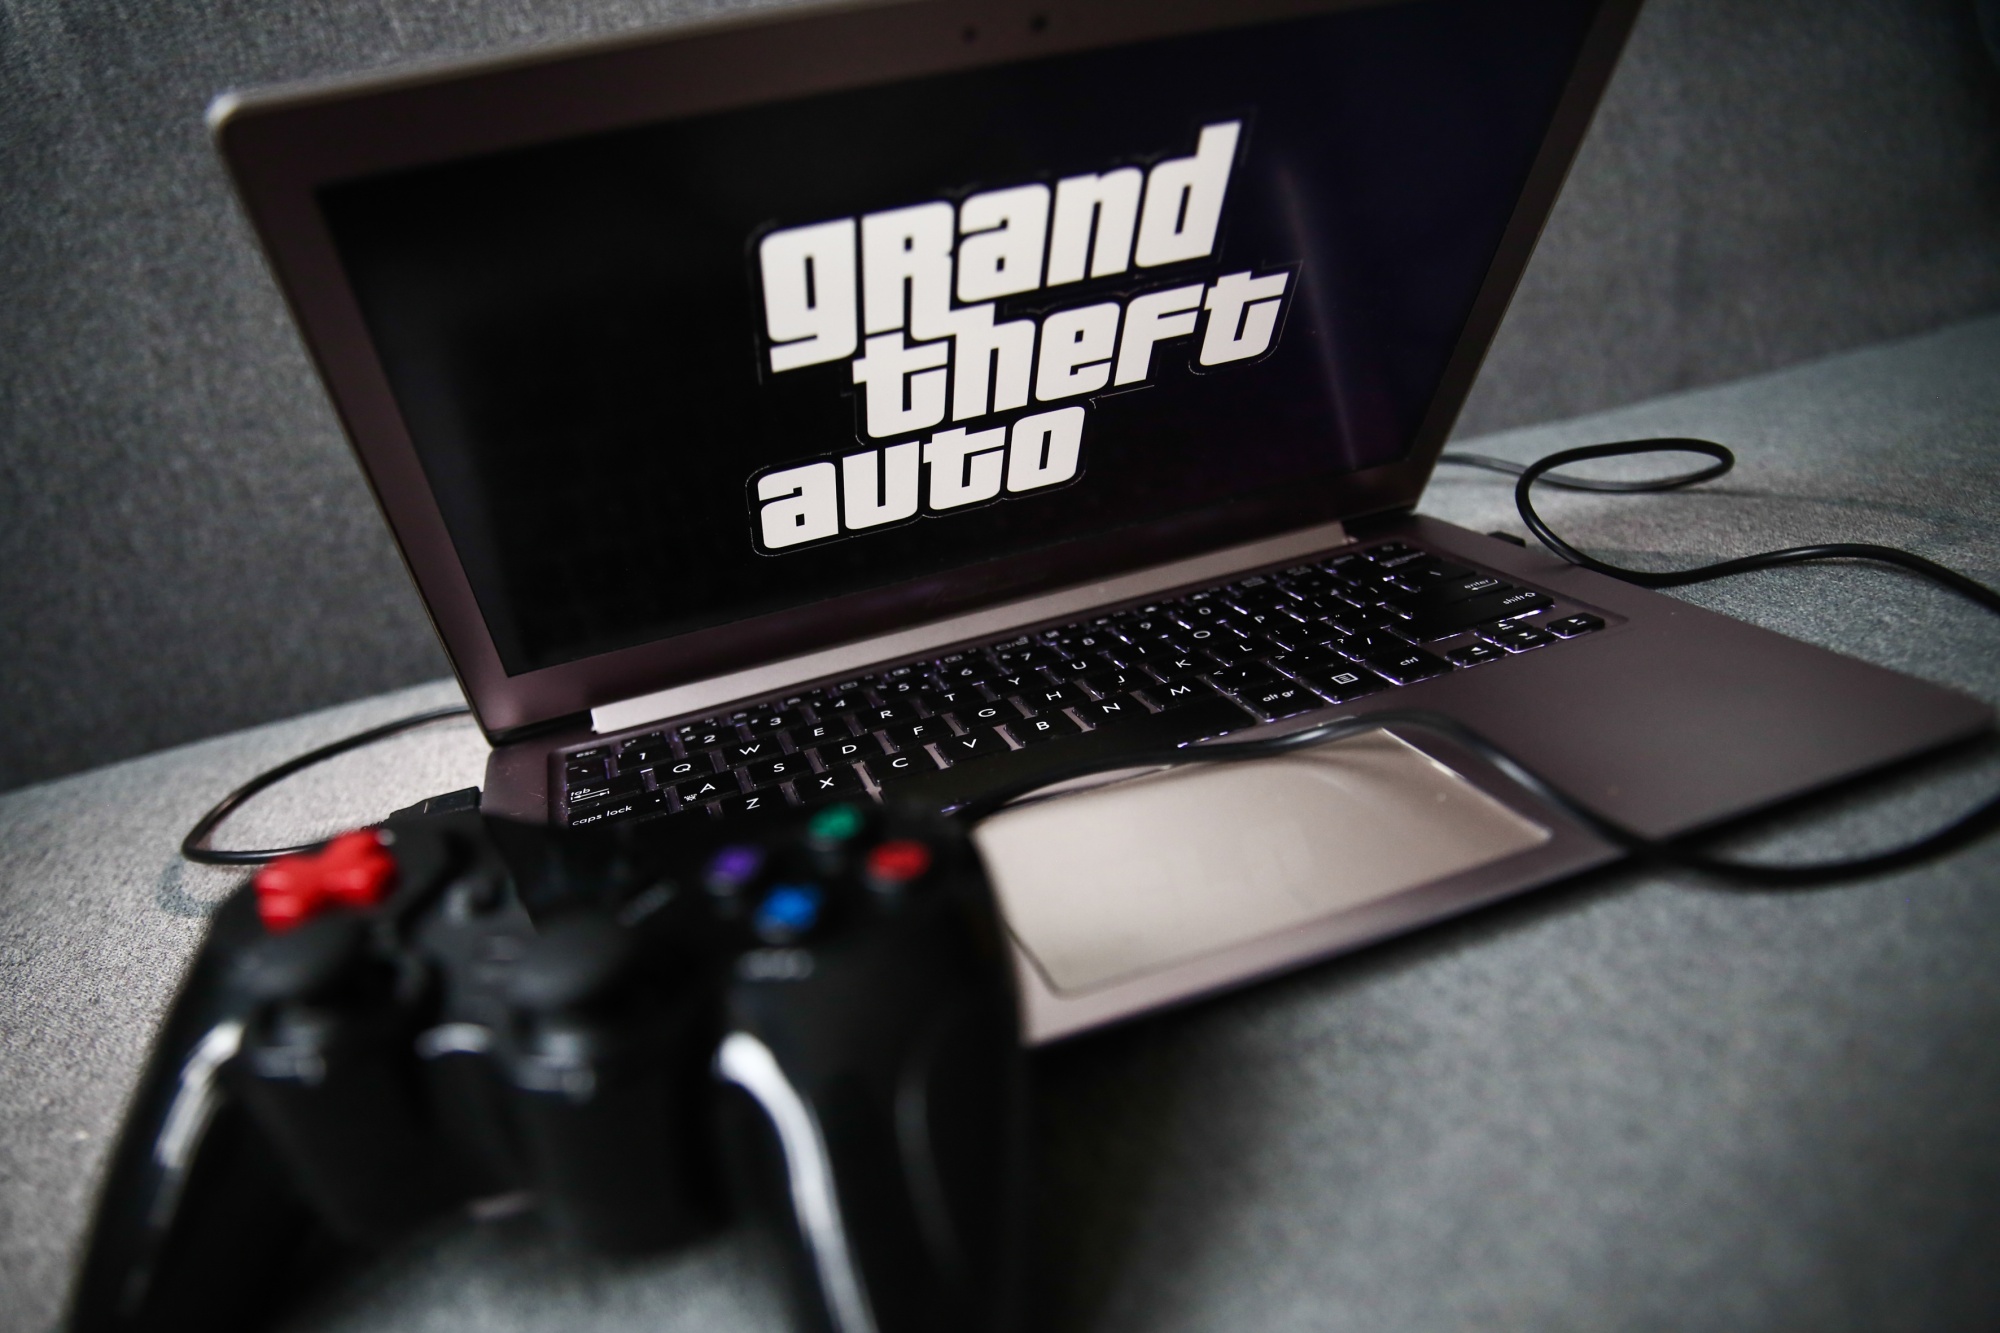 GTA Online: Rockstar Games Will End Support for Windows 7 and 8 Soon